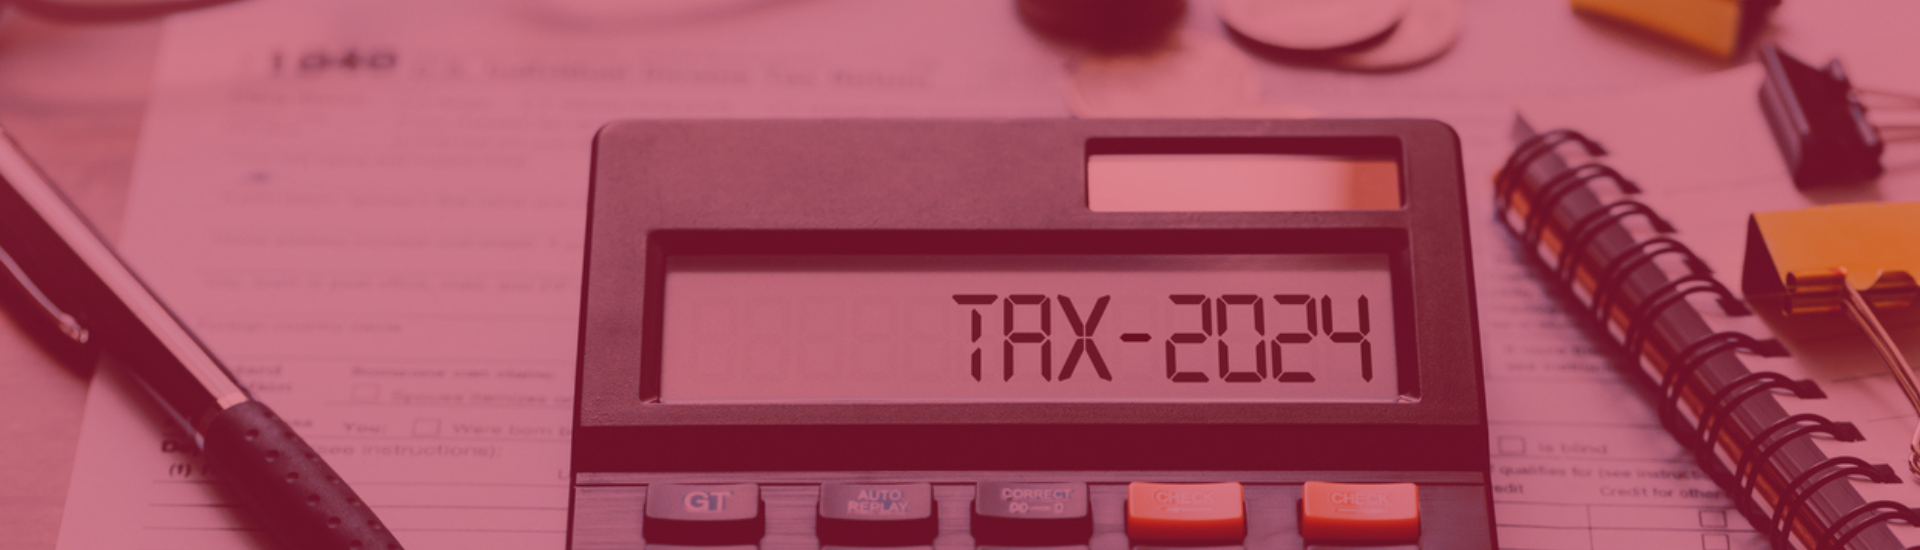 Calculator showing the words "Tax-2024" on the screen, surrounded by tax forms, notepads and coins.